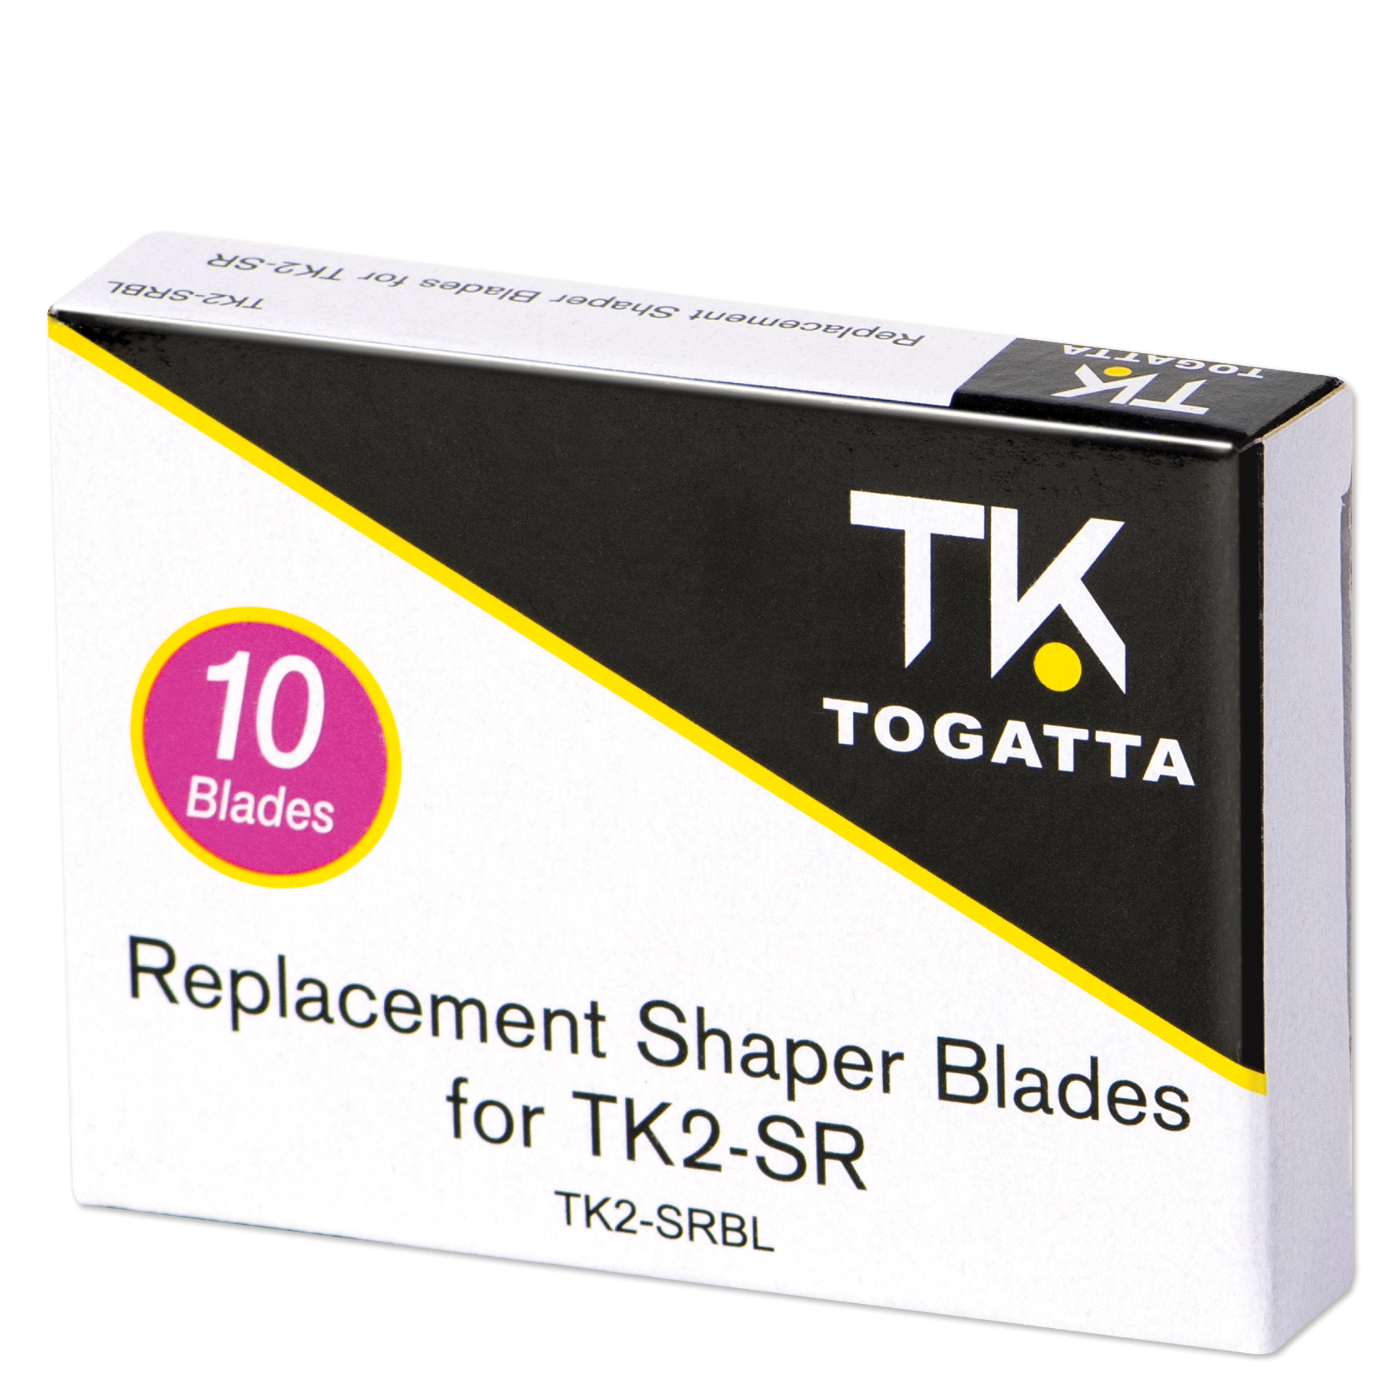 Replacement Blades for TK2-SR Styling Razor